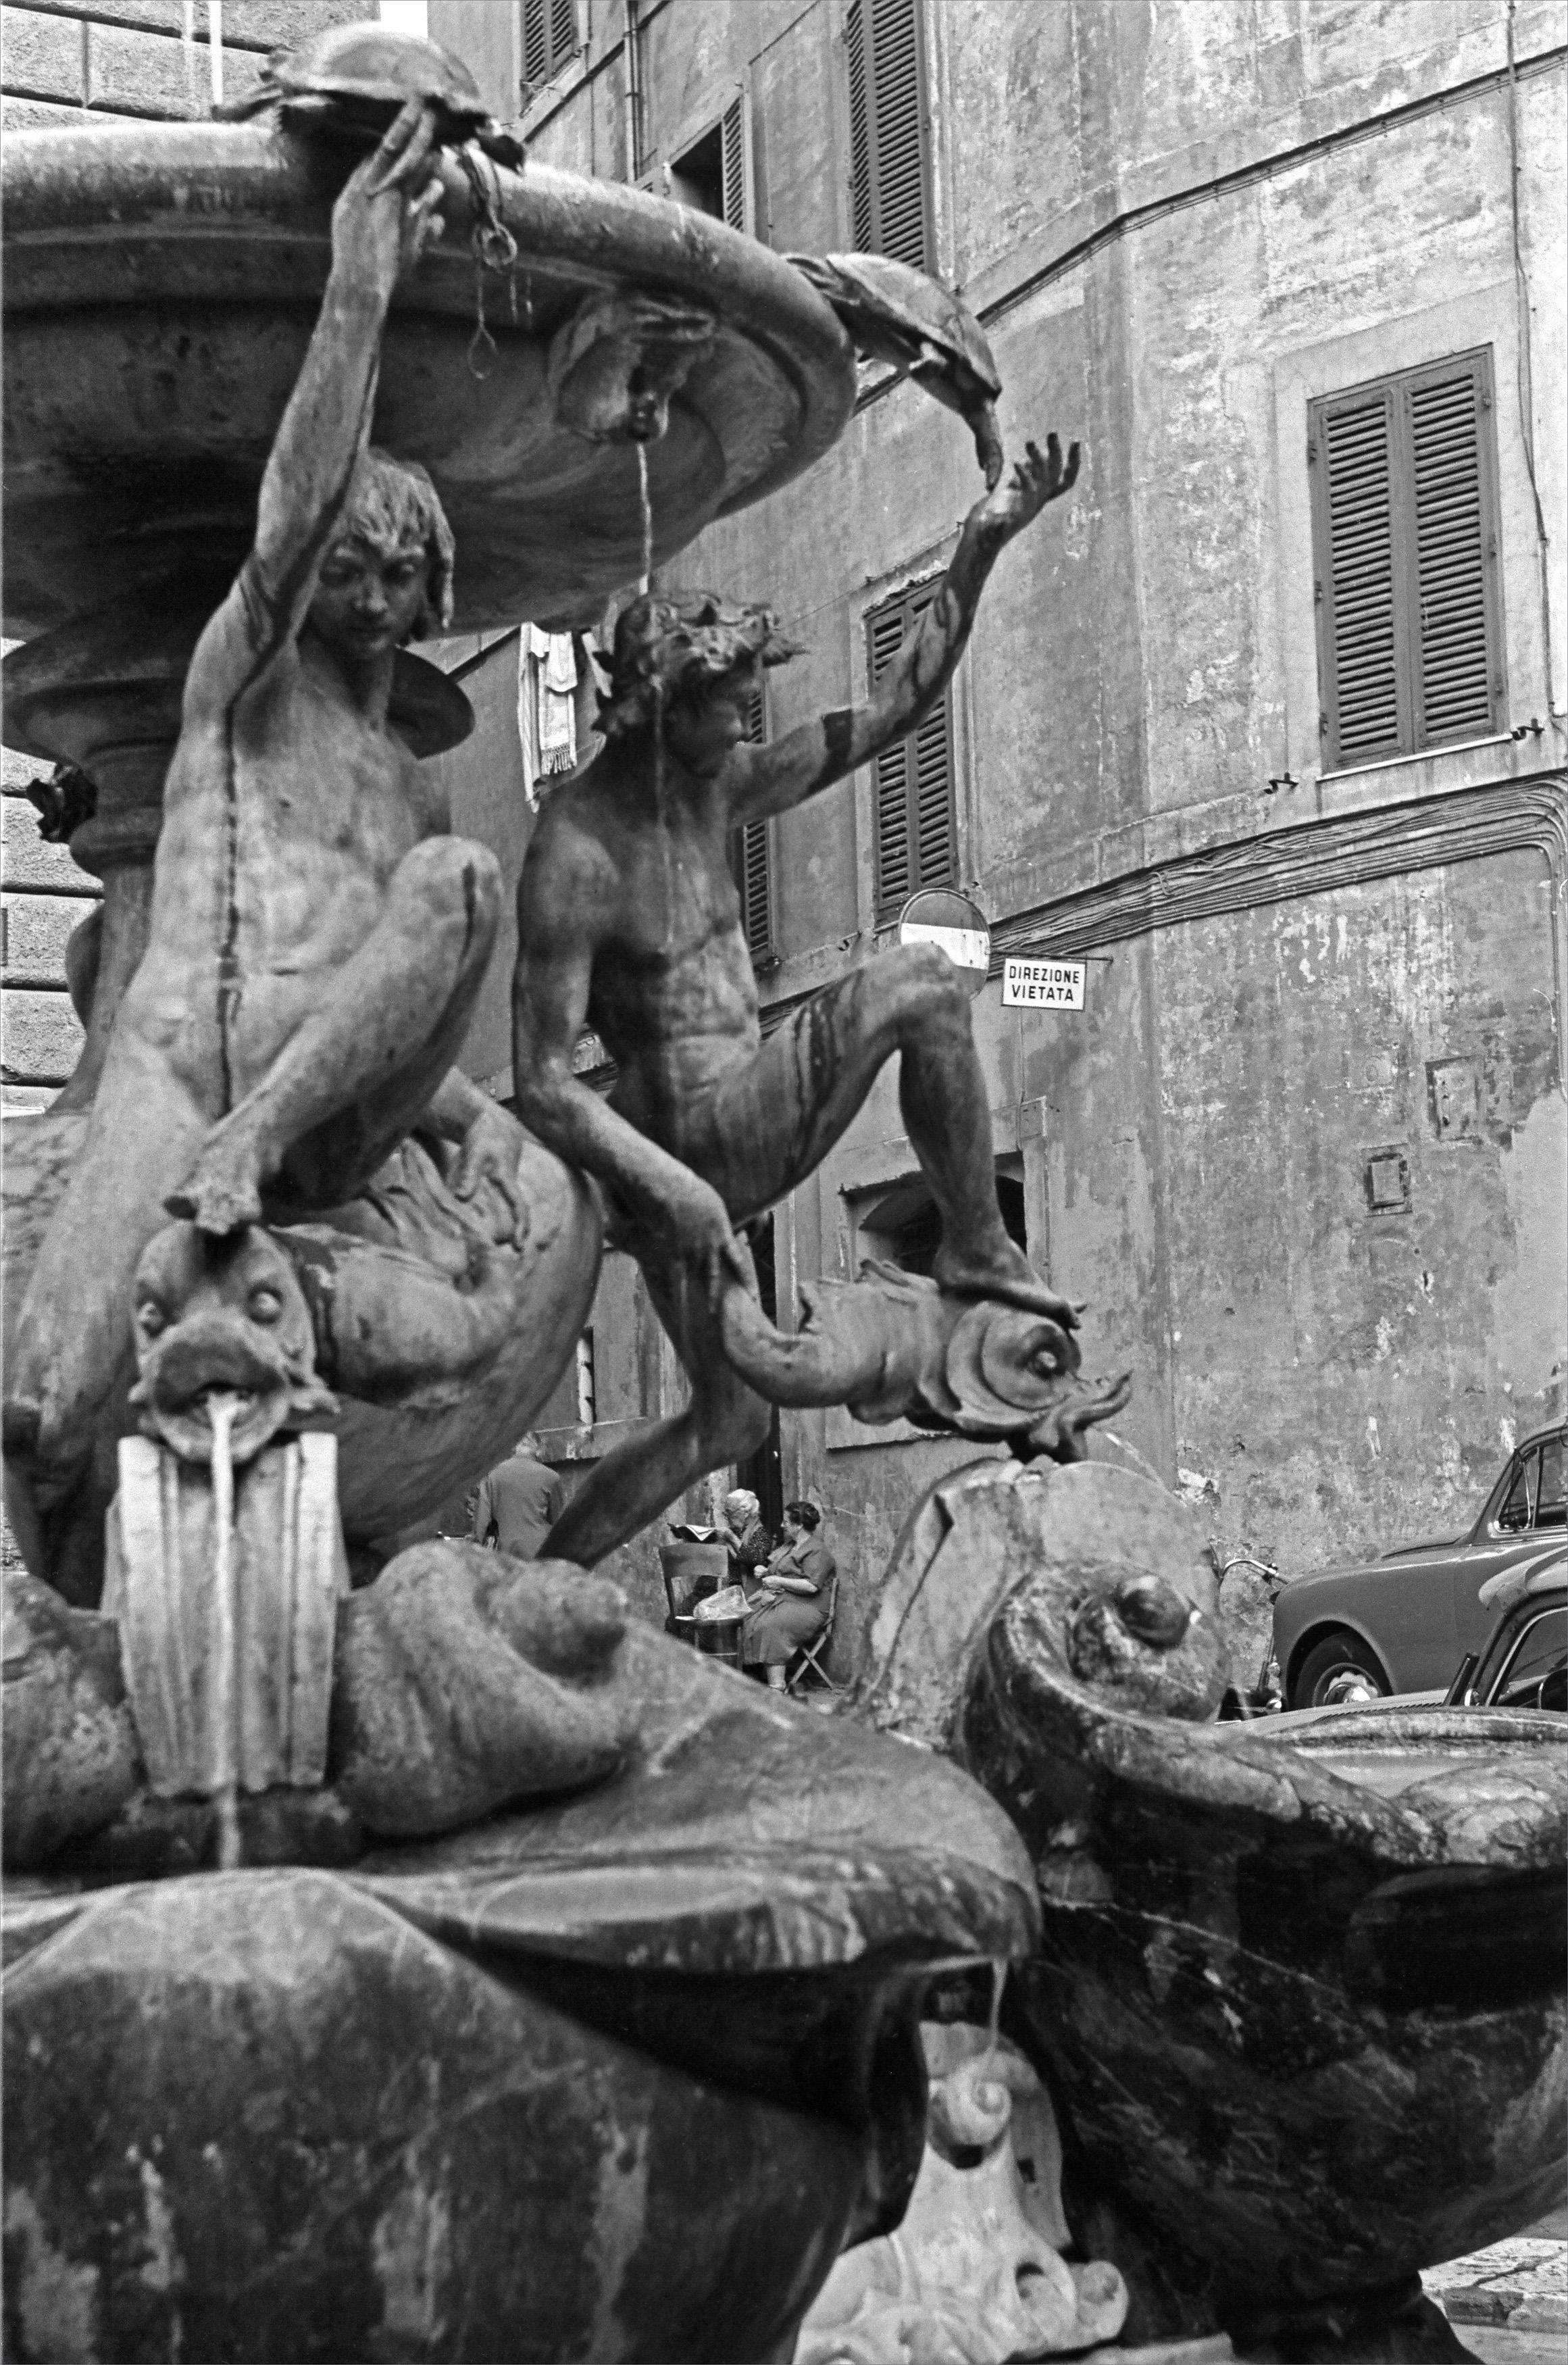 Chiacchiere in piazza, 1956 - Roma - Contemporary Black & White Photography